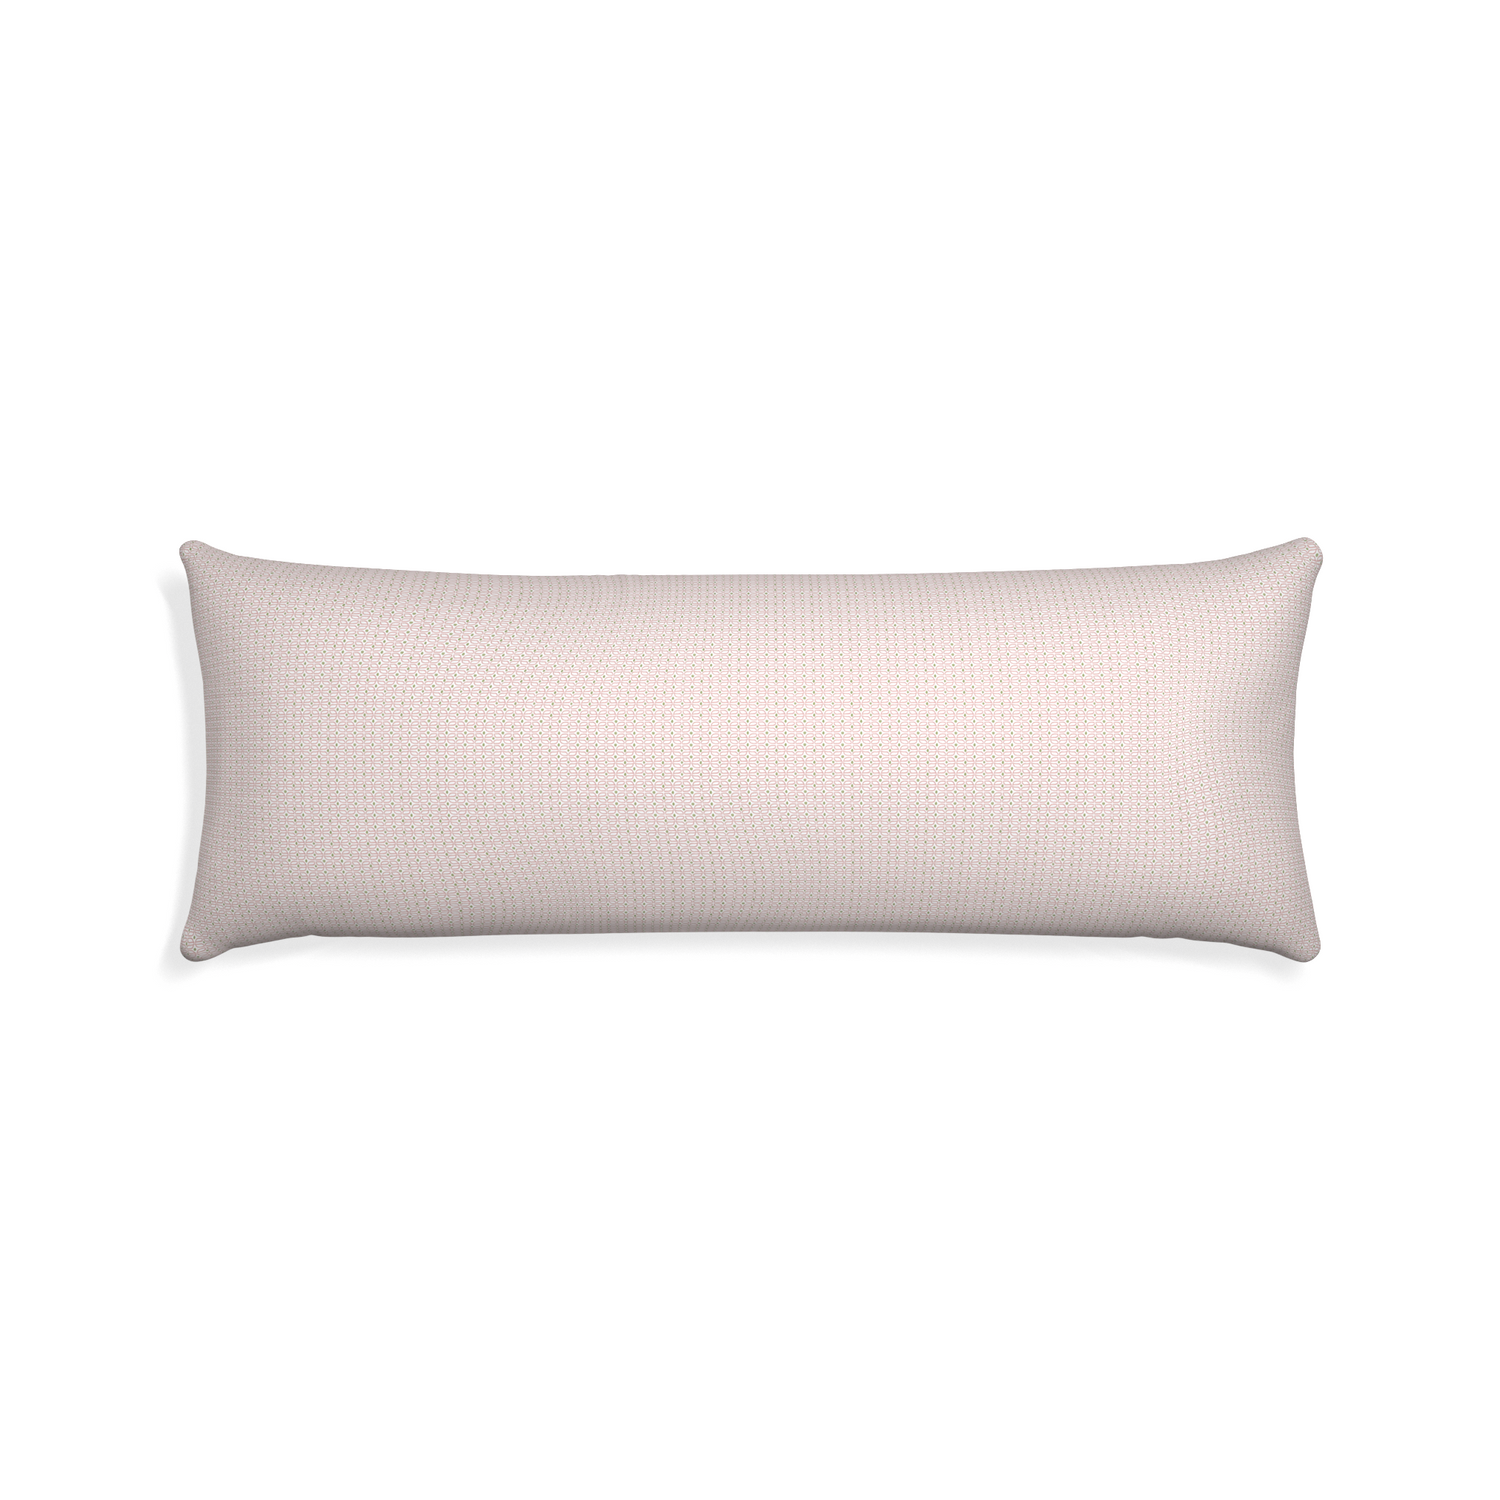 Xl-lumbar loomi pink custom pink geometricpillow with none on white background